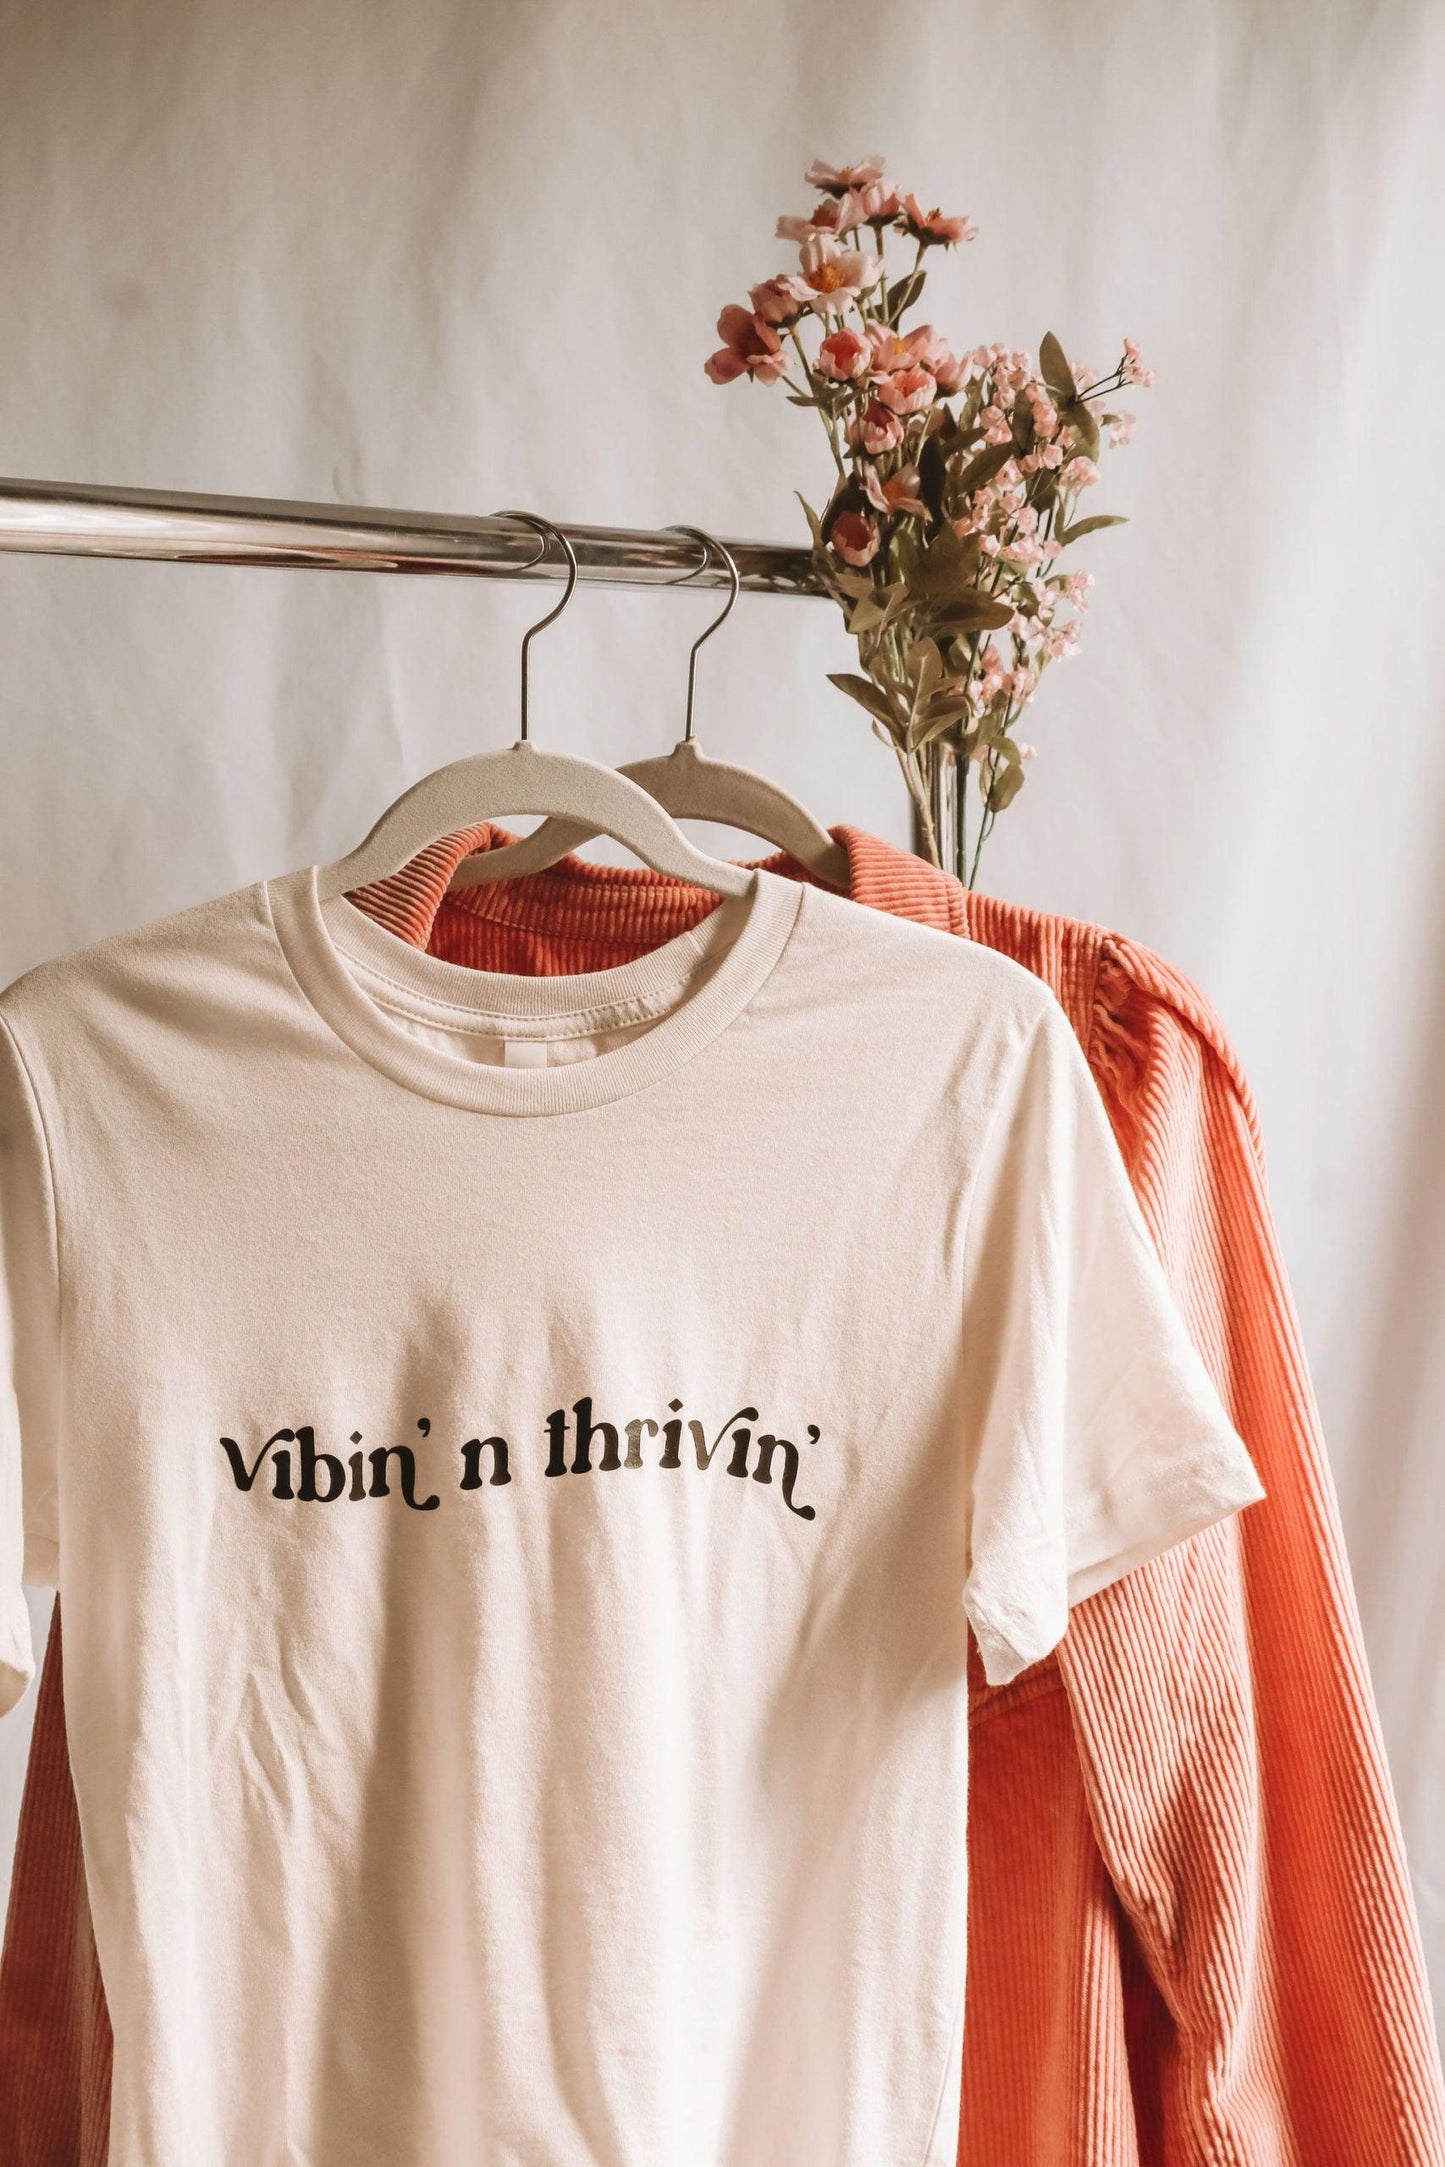 A white shirt with "vibin' n thrivin'" written in wavy retro text hanging on a clothing rack in front of a pink corduroy button up shirt